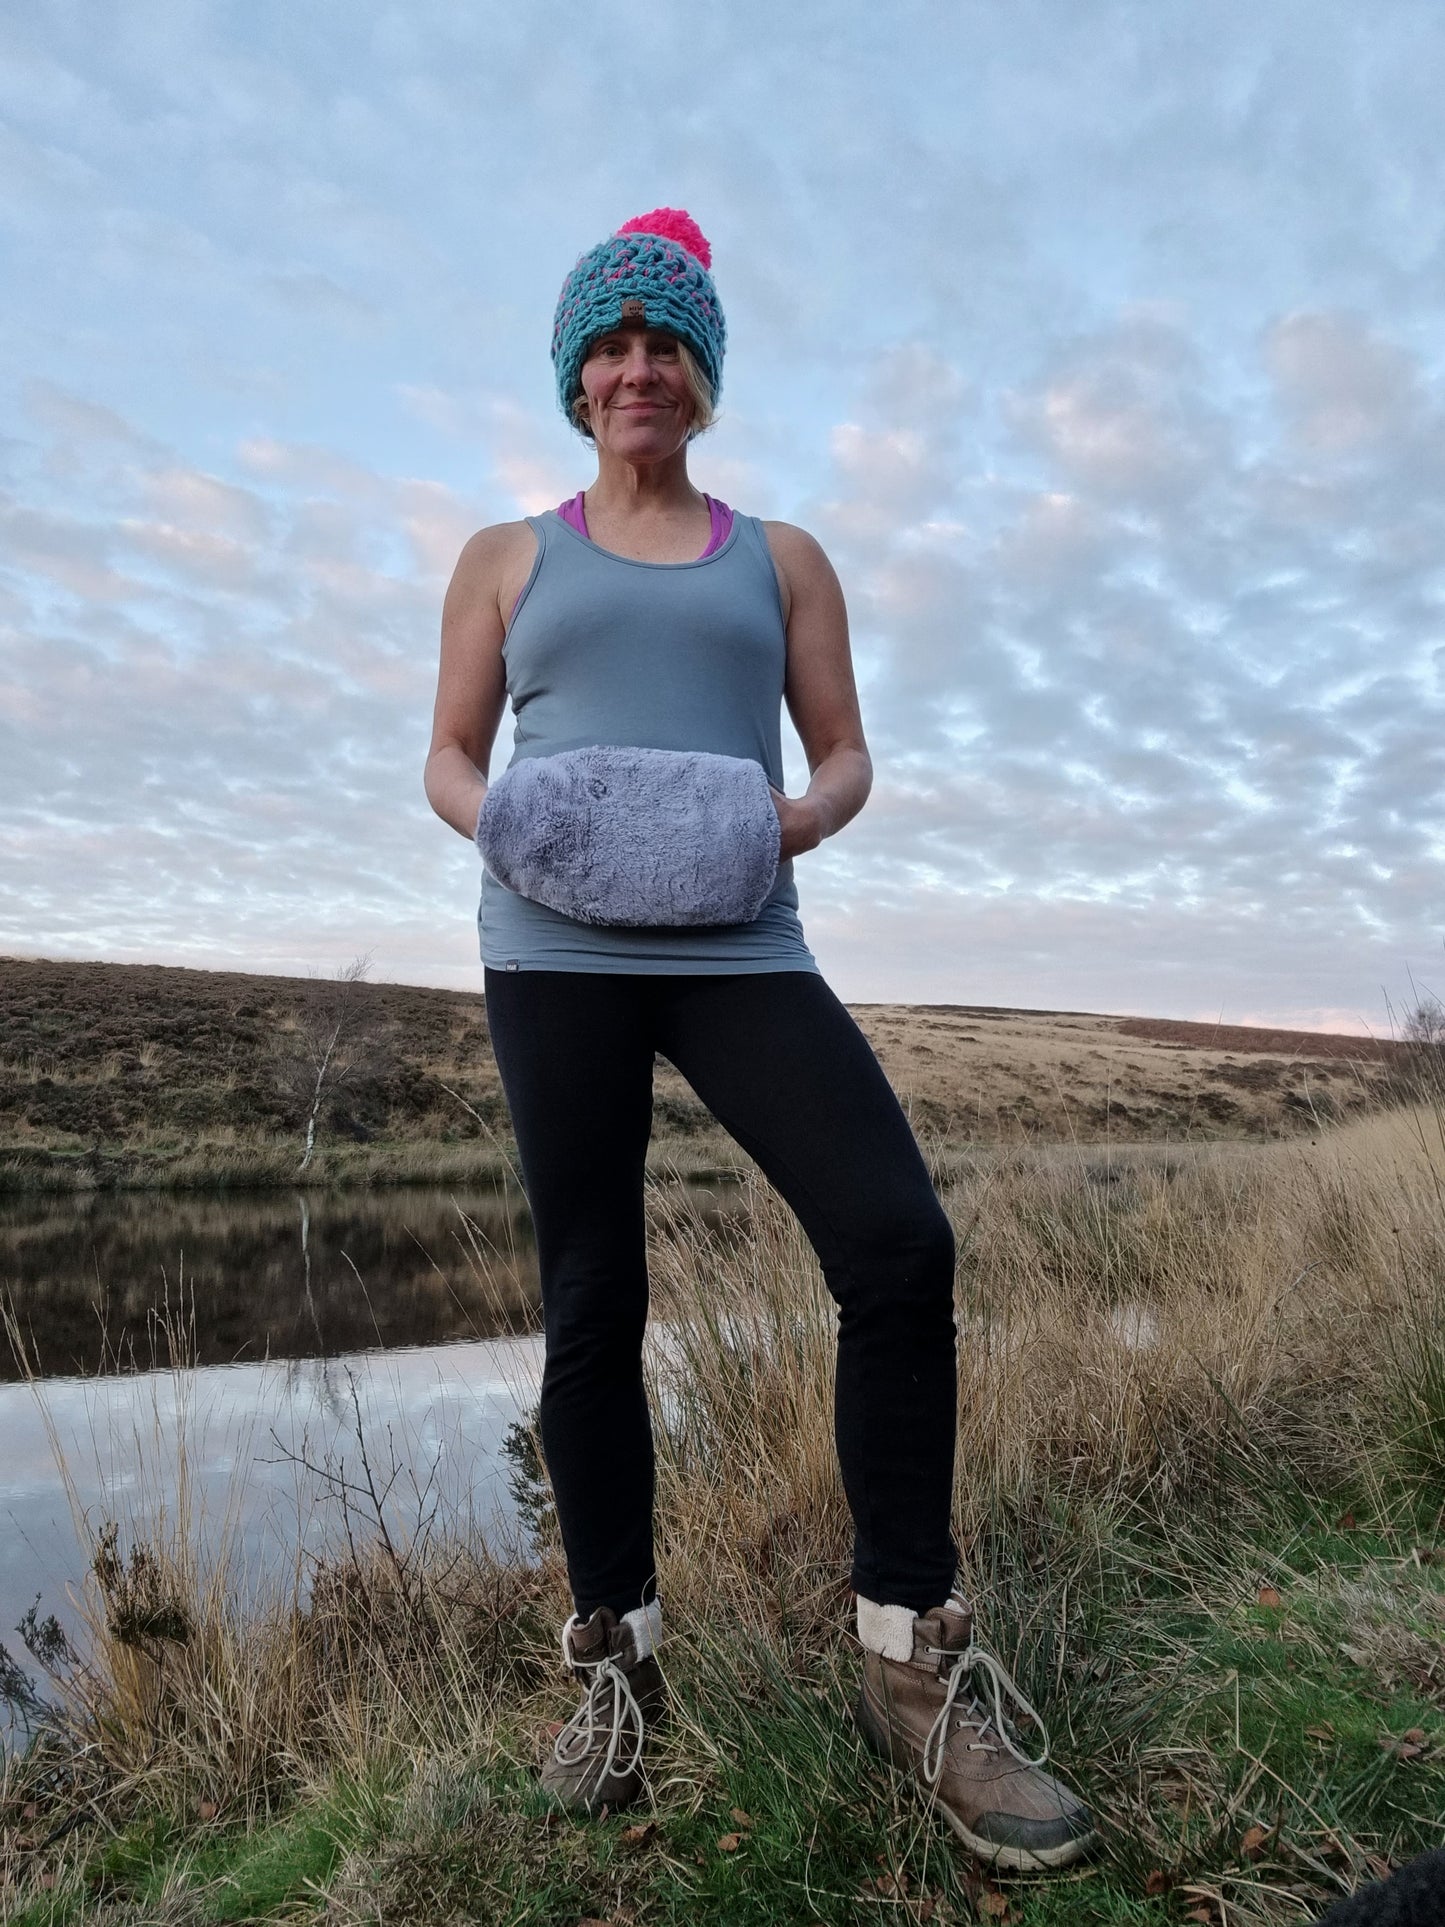 a lady stands in front of a lake and has her hands warming in a Hottum core warmer that is fastened around her waist. On her head she wears a bobble hat